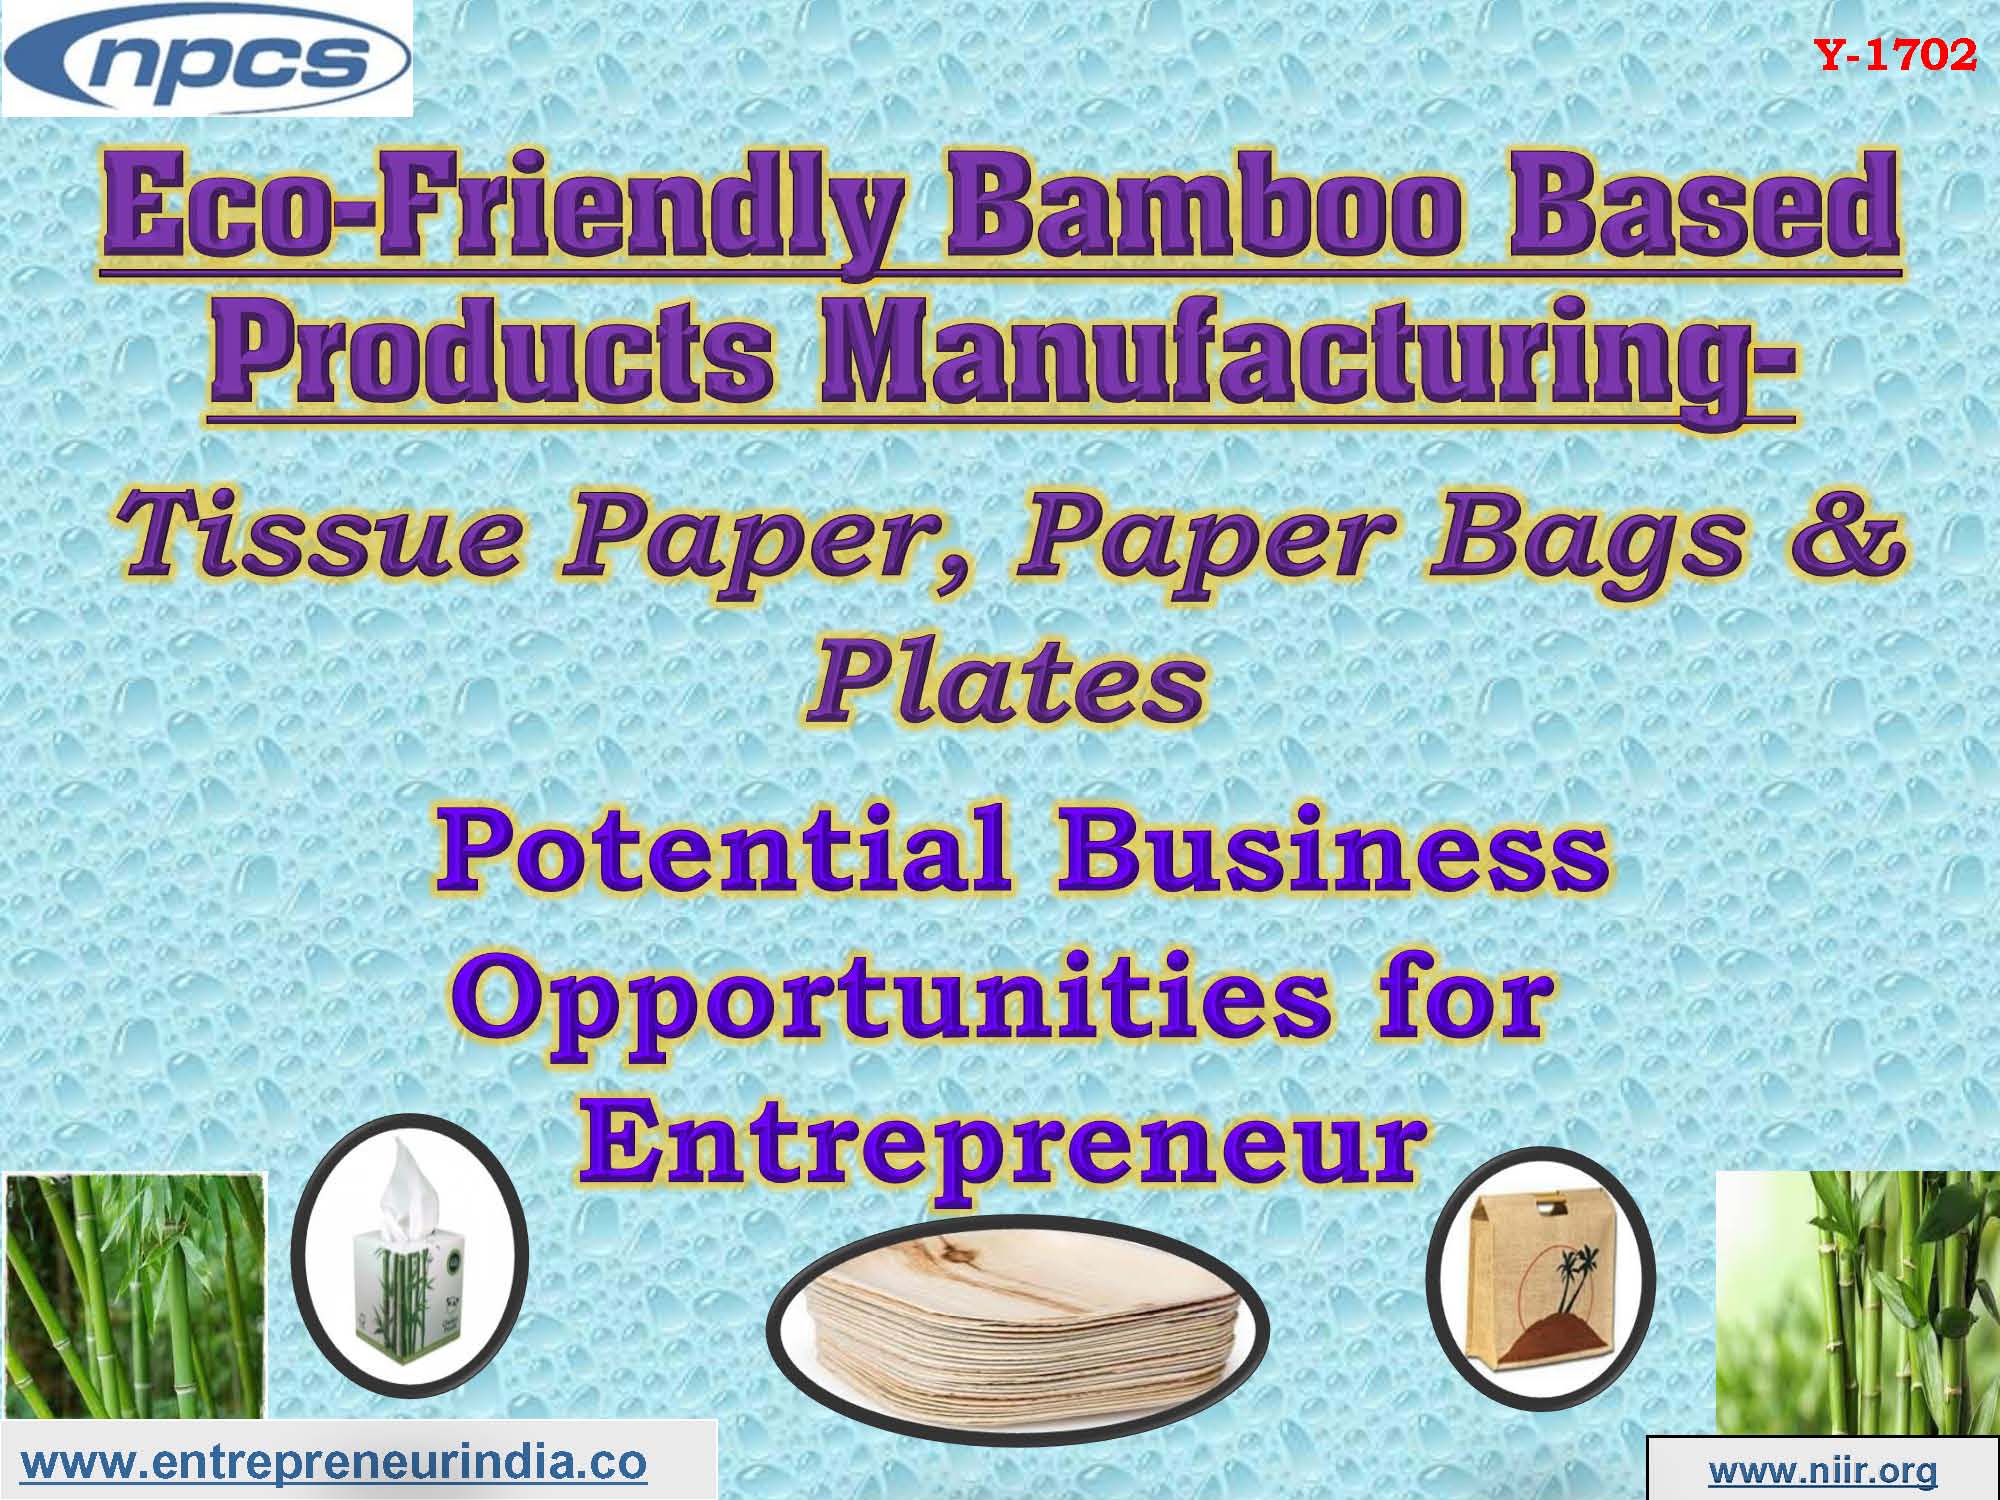 Eco-Friendly Bamboo Based Products Manufacturing- Tissue Paper, Paper Bags & Plates